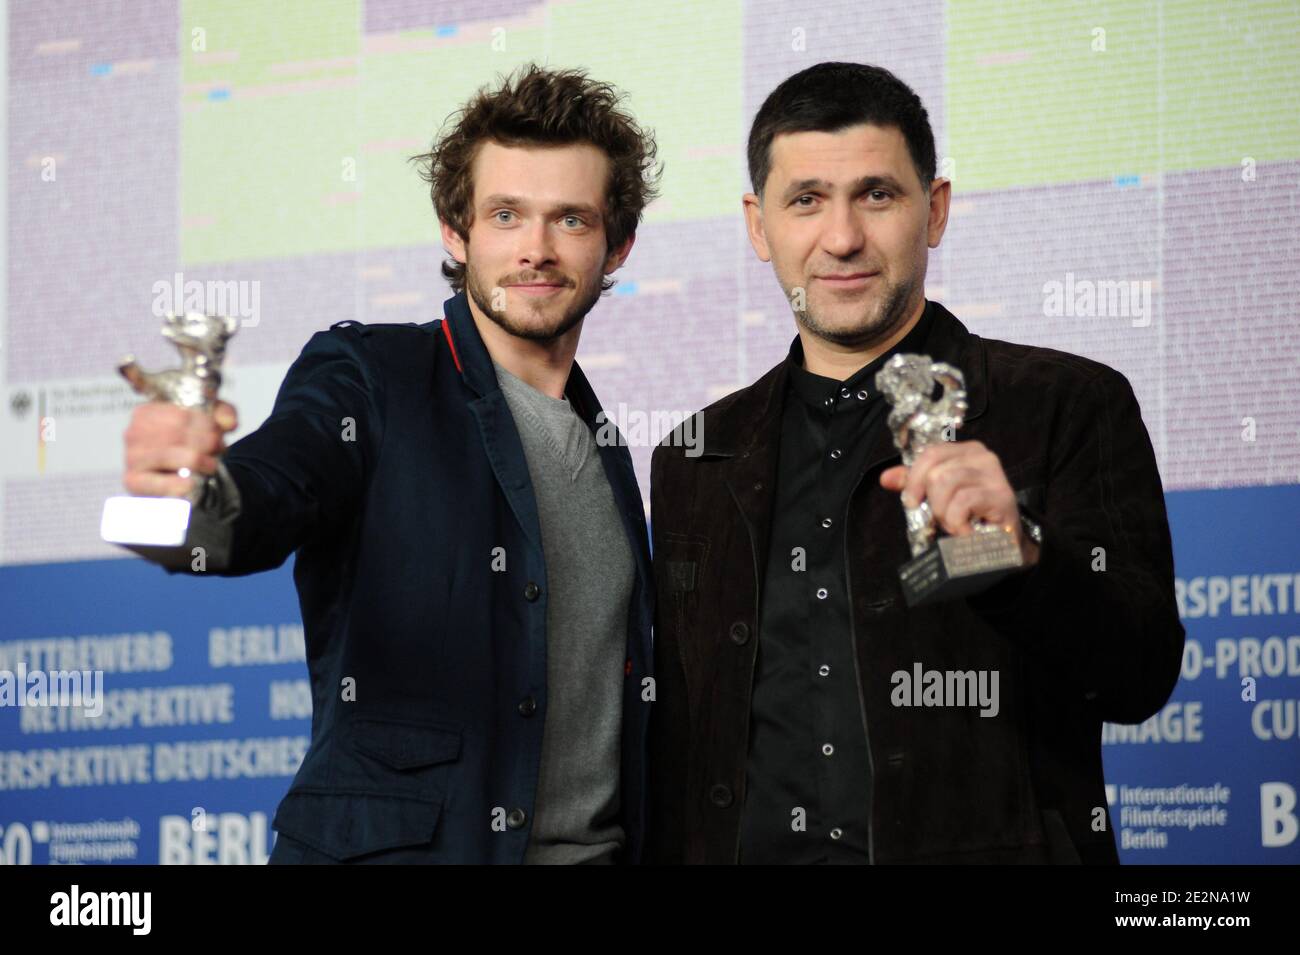 Russian actors Grigory Dobrygin and Sergei Puskepalis pose with the Silver Bear for Best Actor in their film 'Kak ya provel etim letom' (How I Ended This Summer) during a press conference after the awards ceremony of the 60th Berlinale Film Festival in Berlin, Germany on February 20, 2010. Photo by Nicolas Briquet/ABACAPRESS.COM Stock Photo